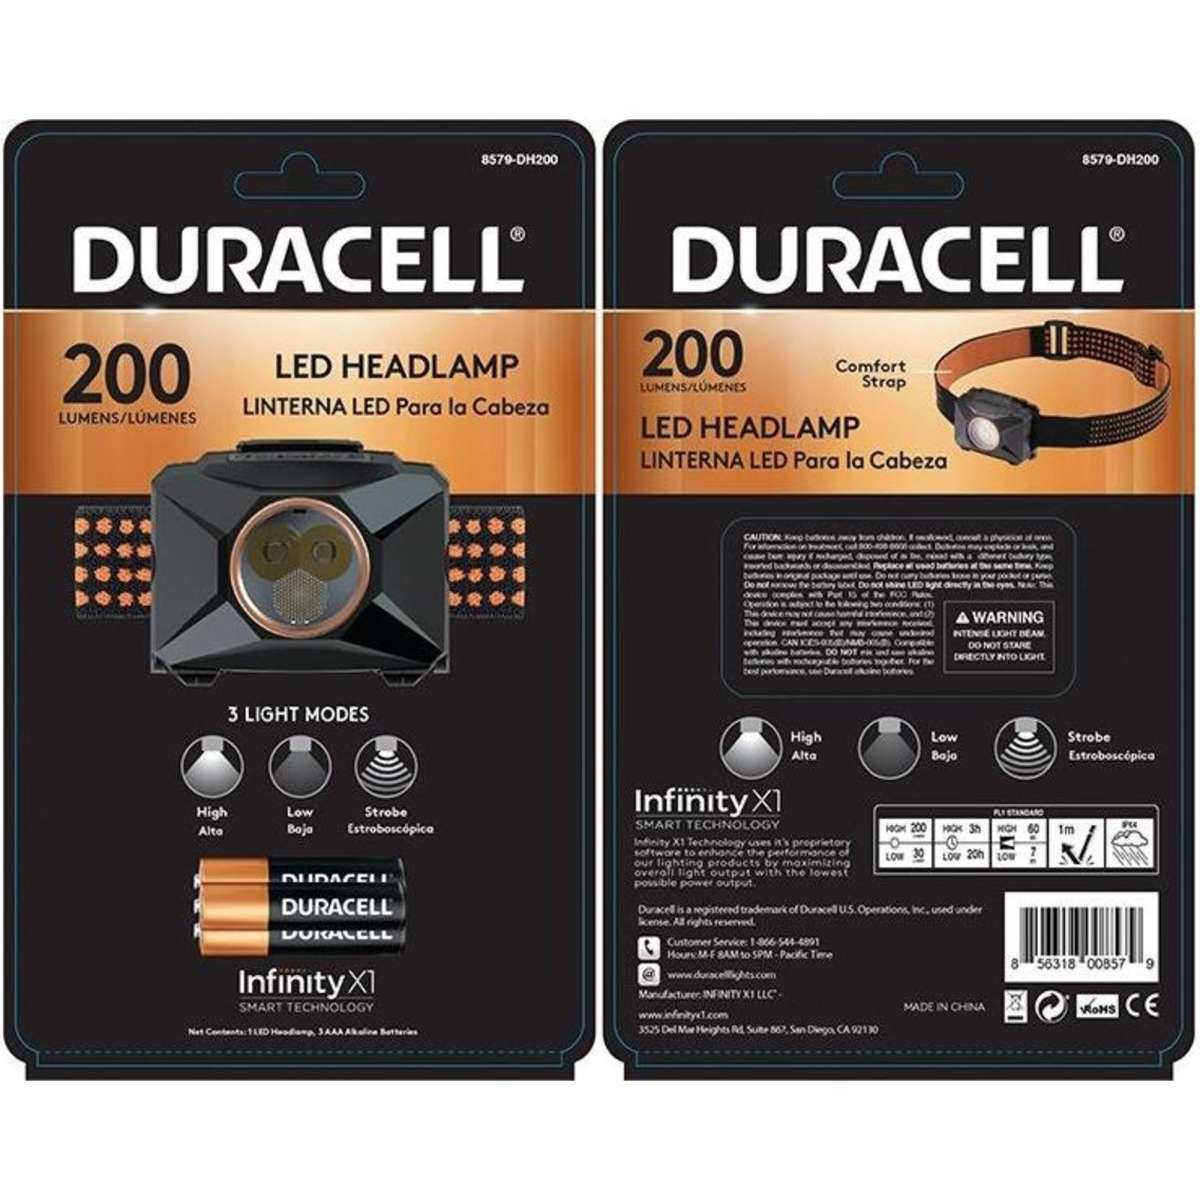 Duracell 200 Lumens Headlamp -Batteries included (Price per pack of 6)